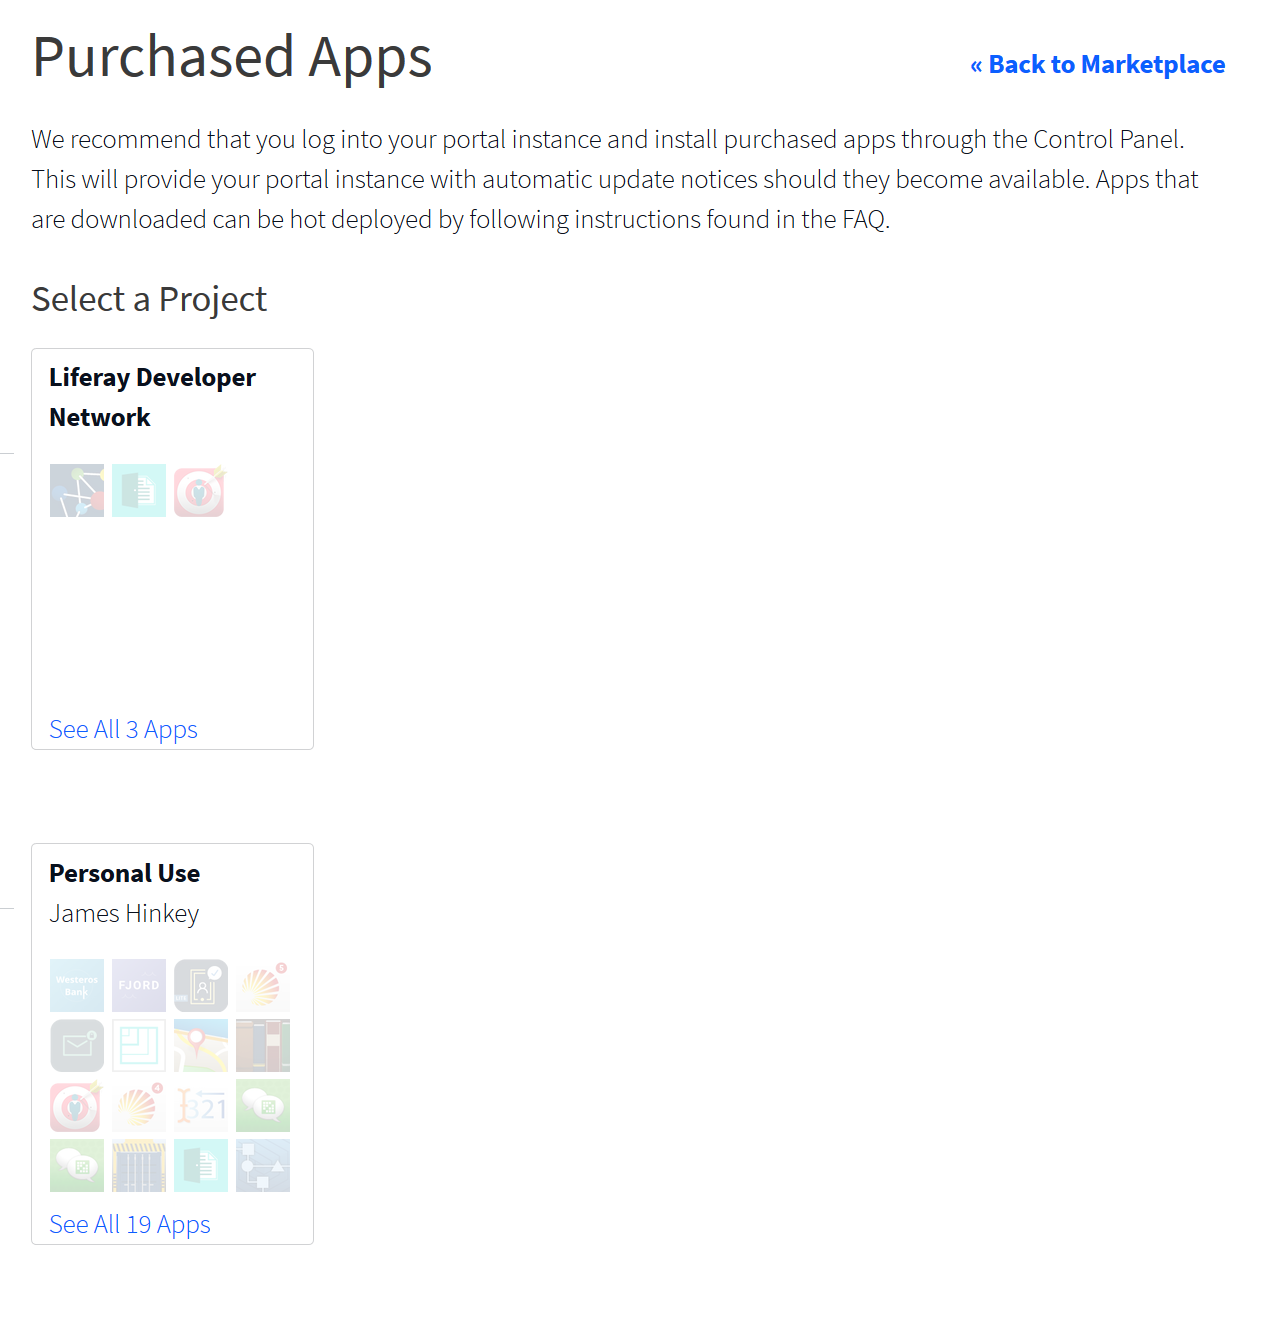 You can manage your purchased apps from the Marketplace and your Liferay.com account home page.